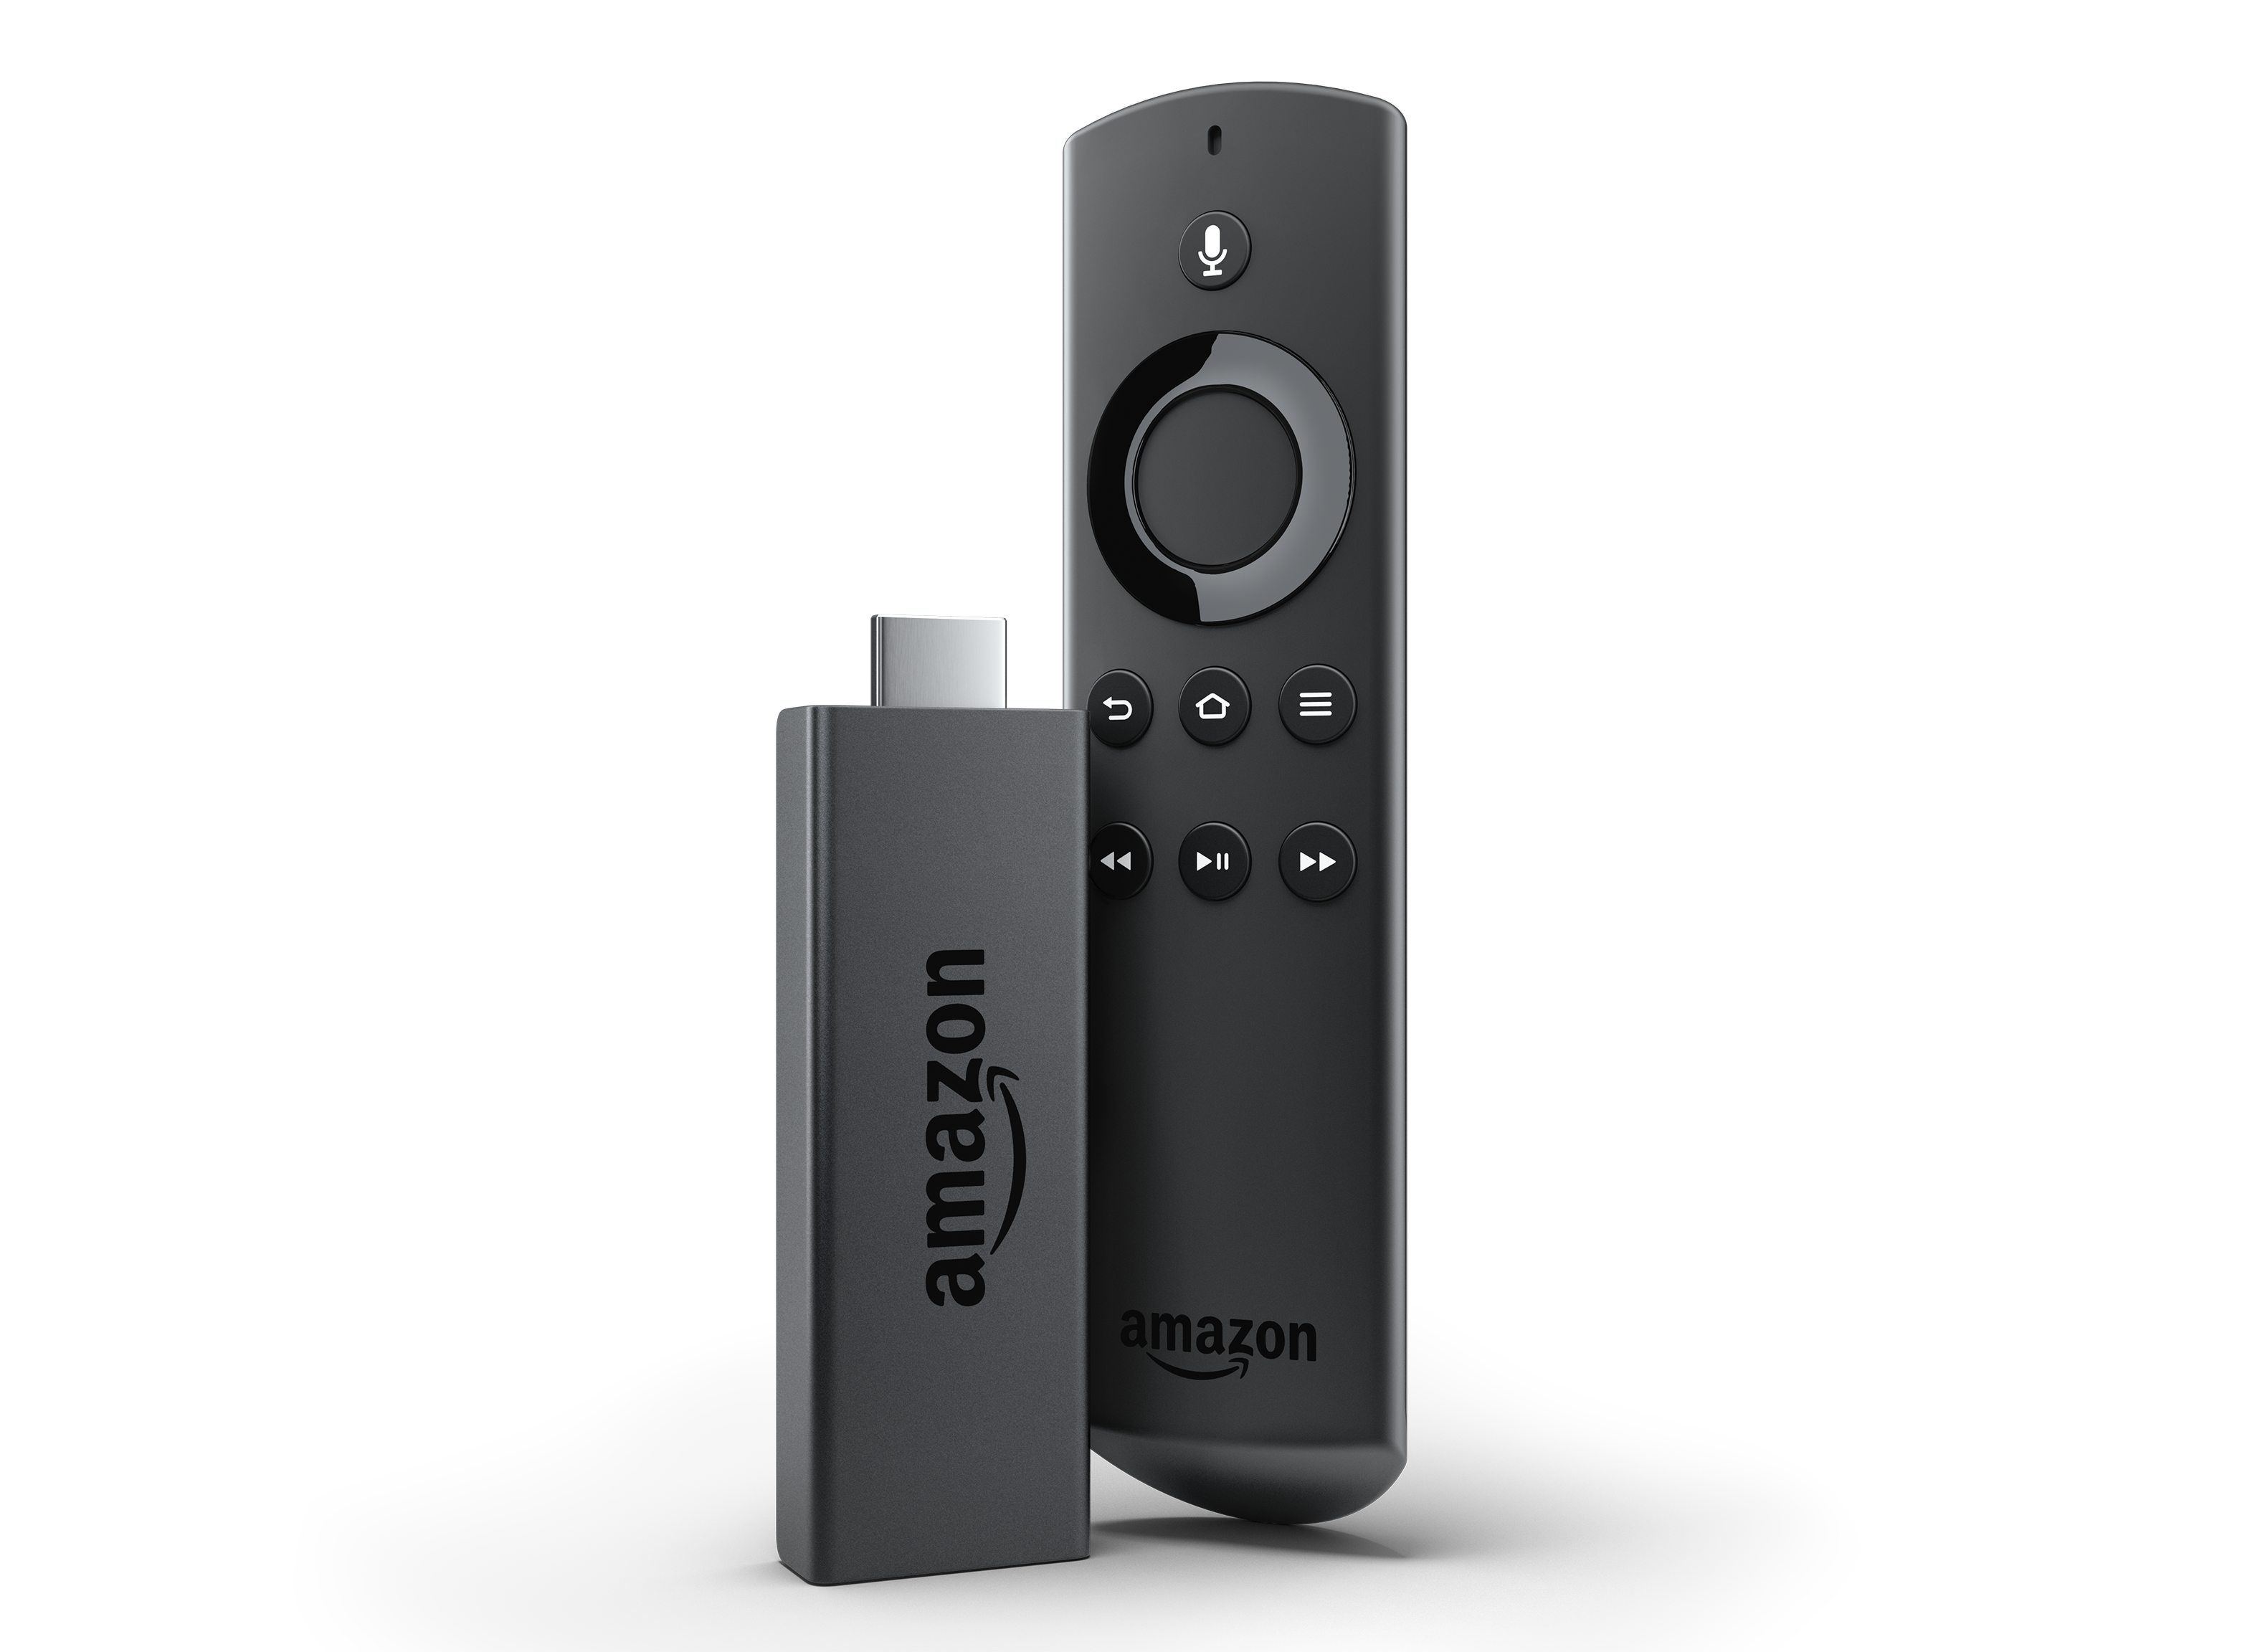 Fire TV Stick 4K (2018) Streaming Media Review - Consumer Reports